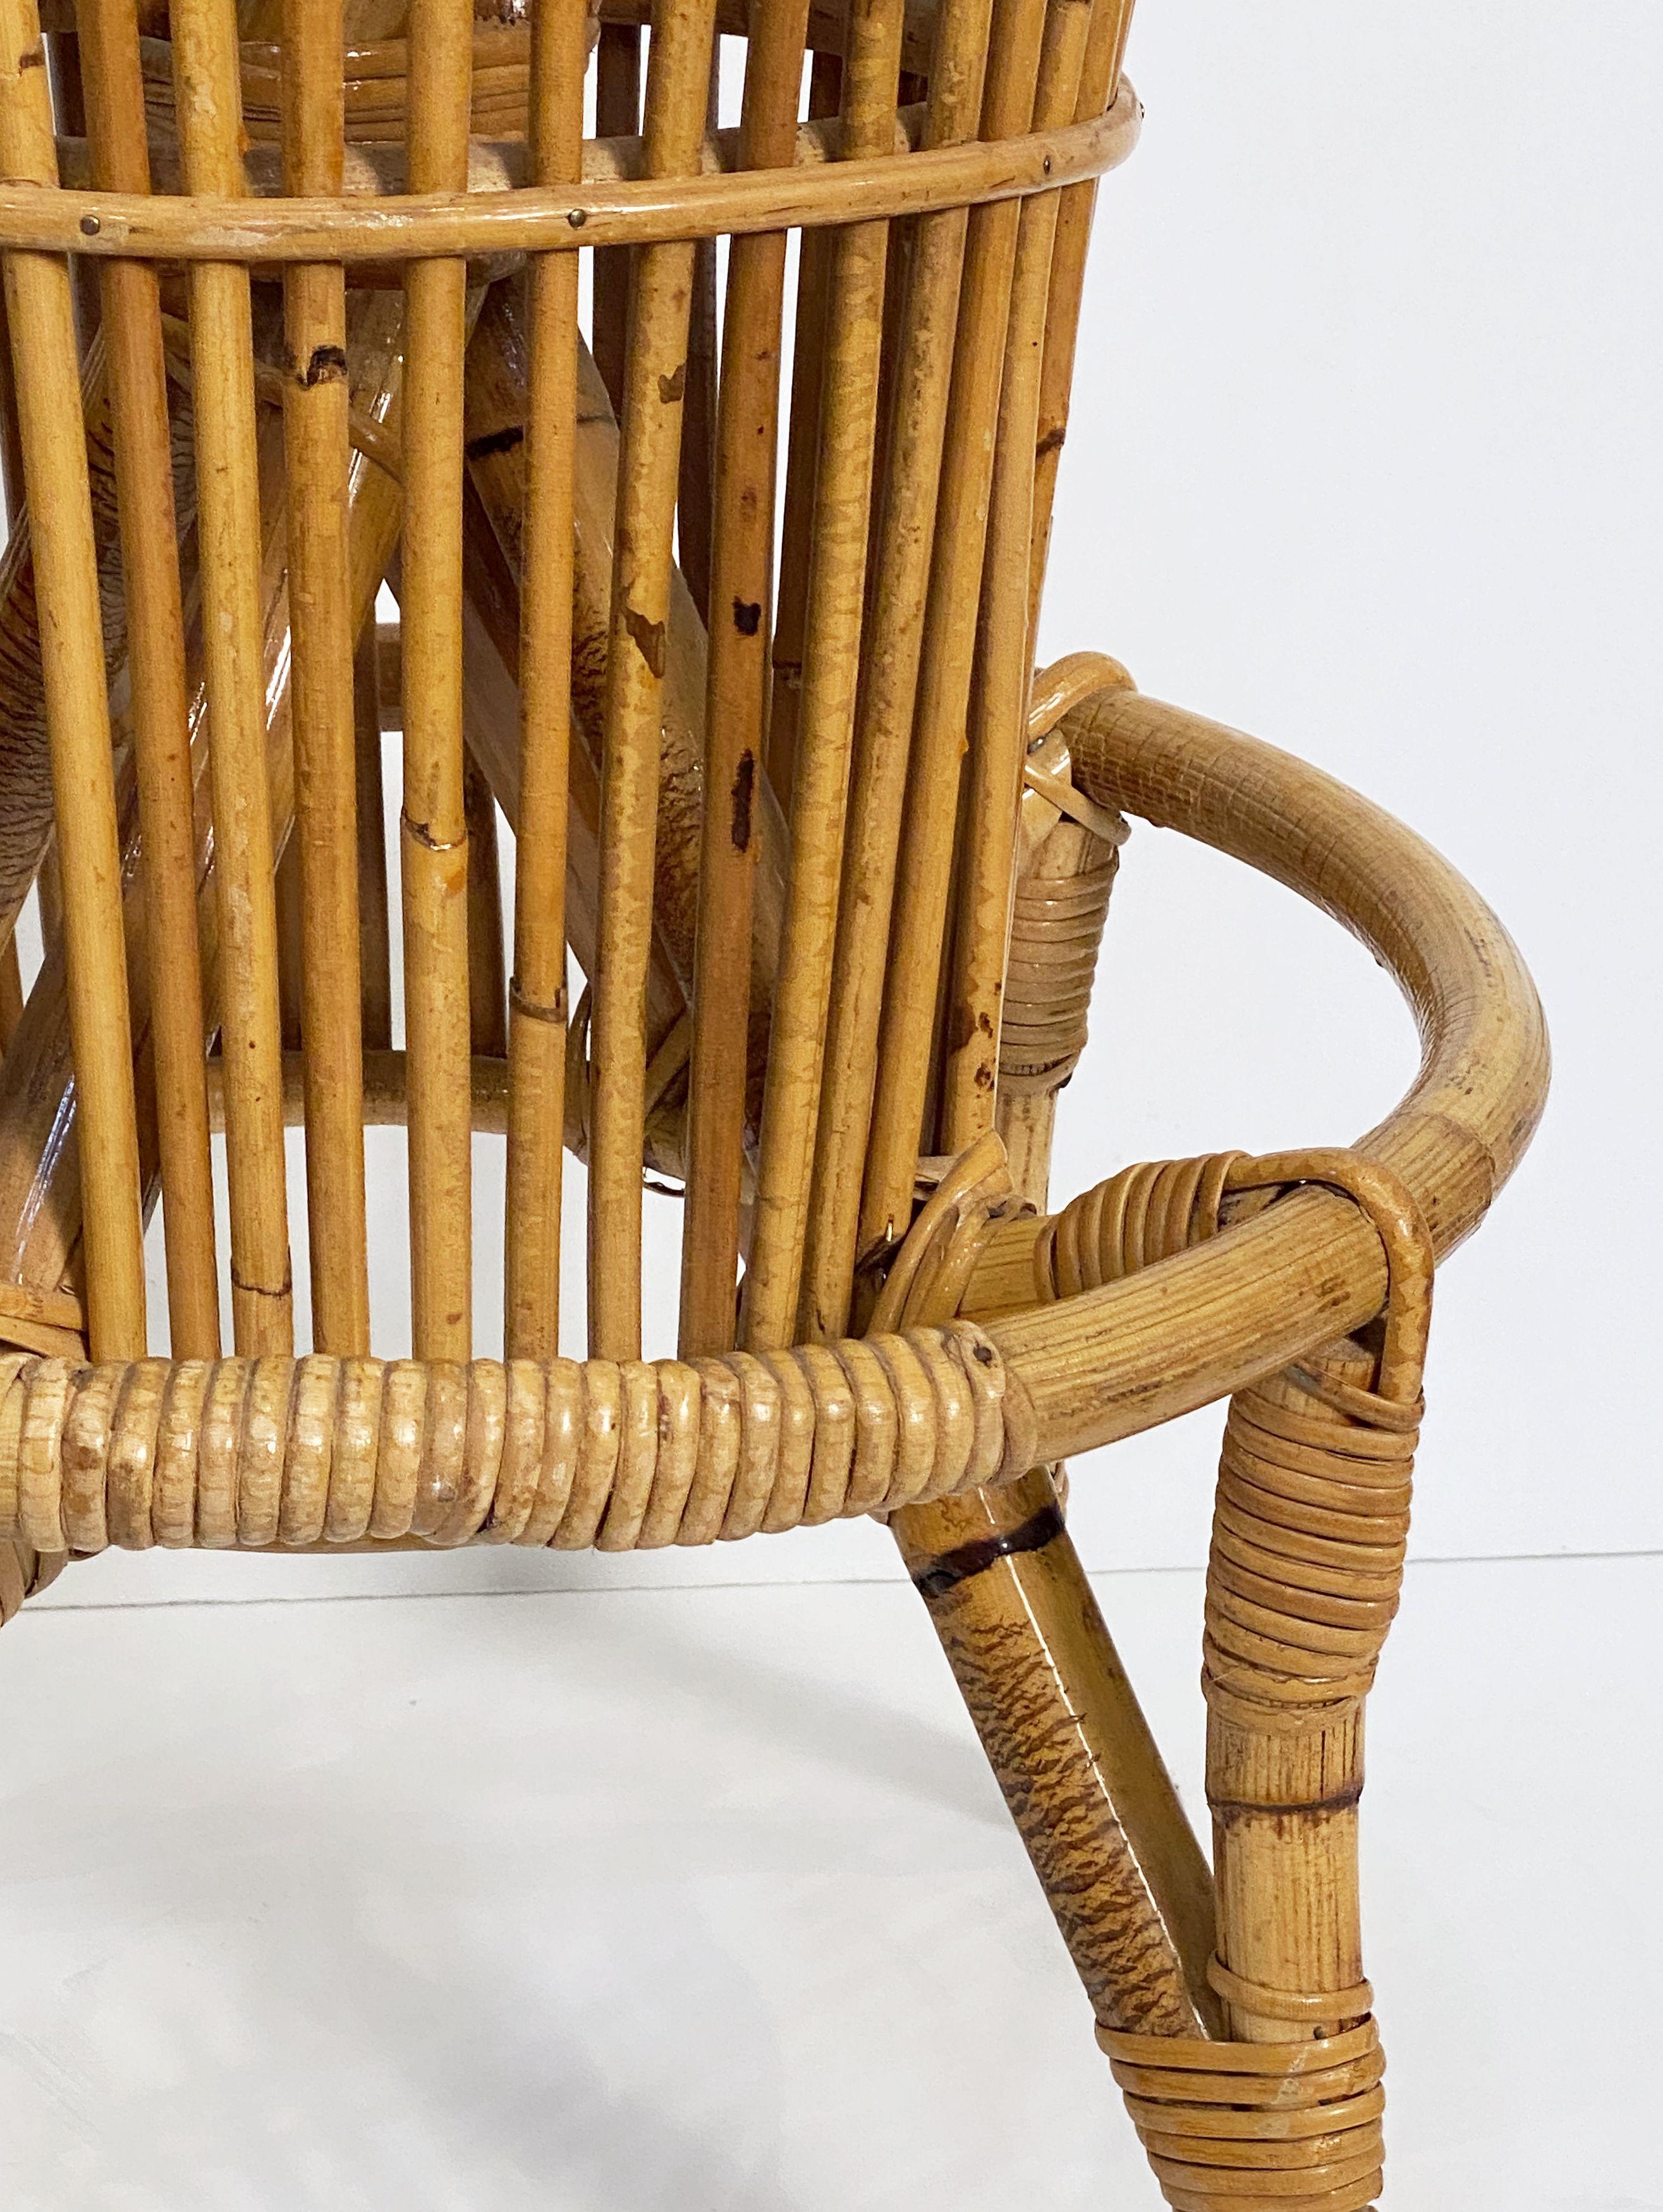 Italian Stool of Rattan and Bamboo from the Mid-20th Century For Sale 11